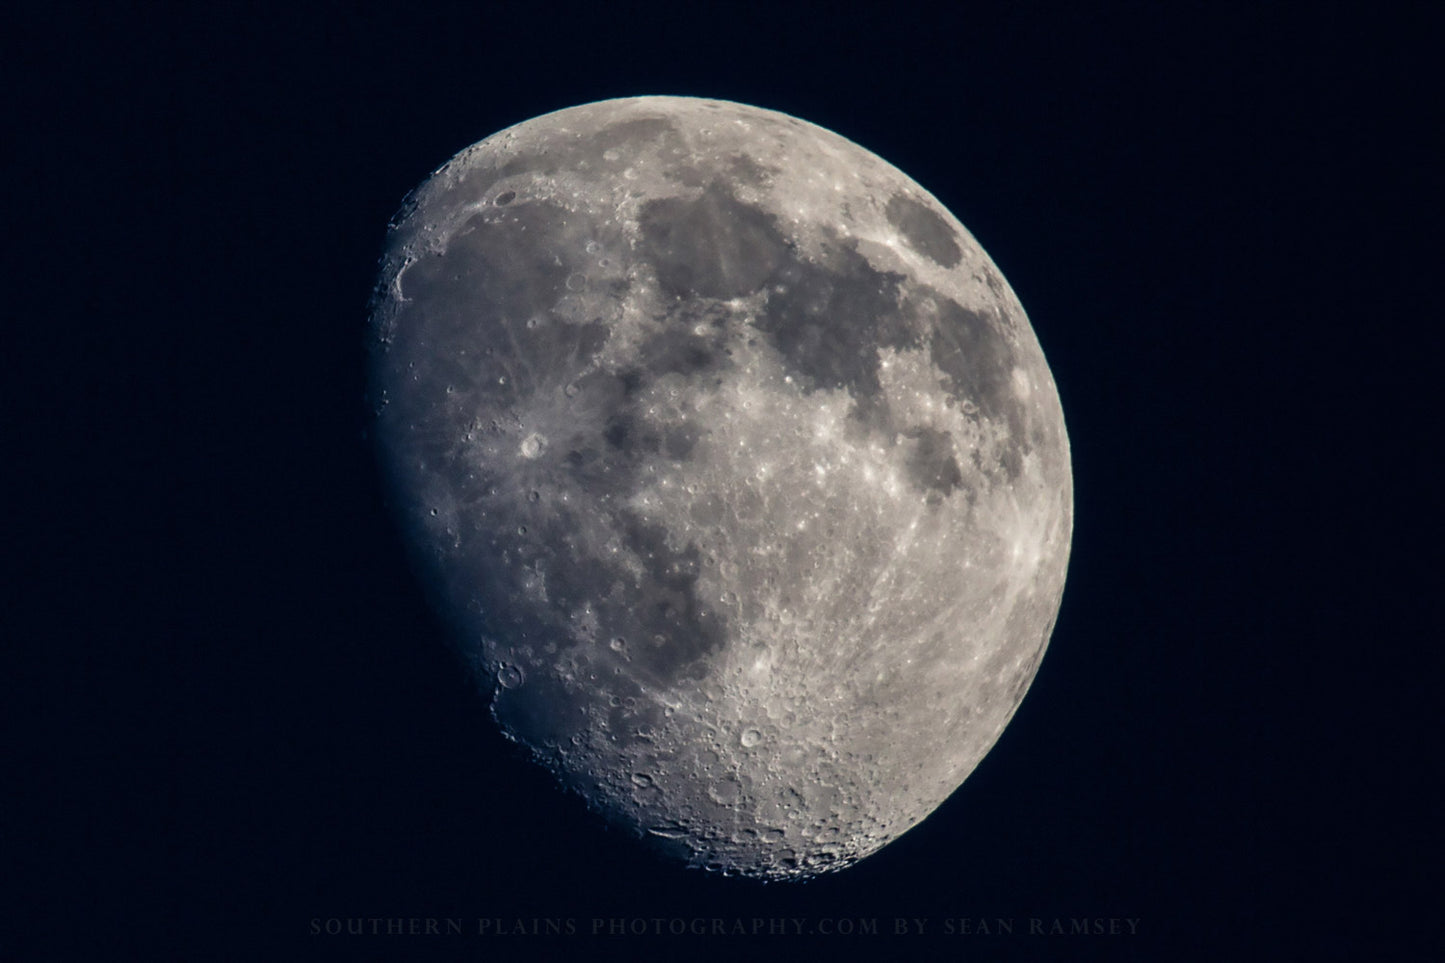 Lunar photography print of a Waxing Gibbous moon with visible craters by Sean Ramsey of Southern Plains Photography.